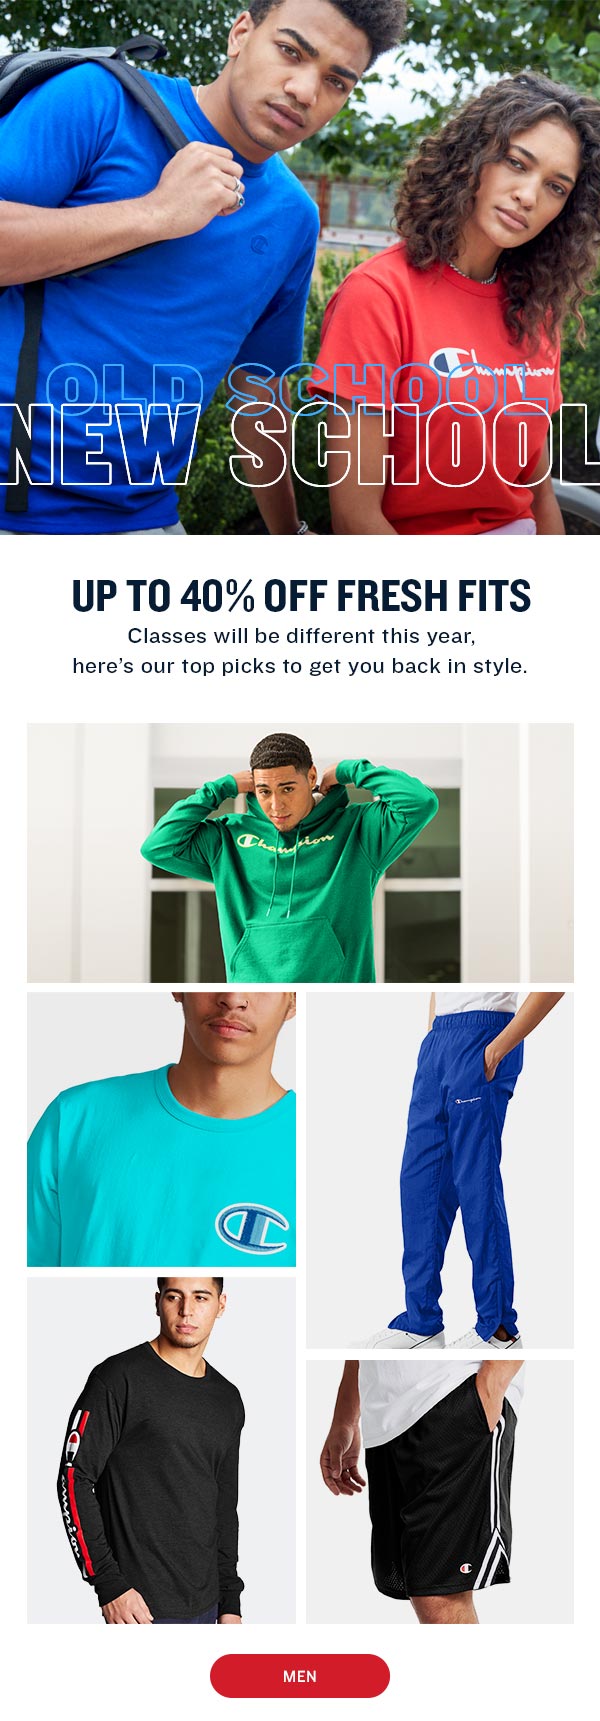 Back to Campus Savings Up to 40% Off